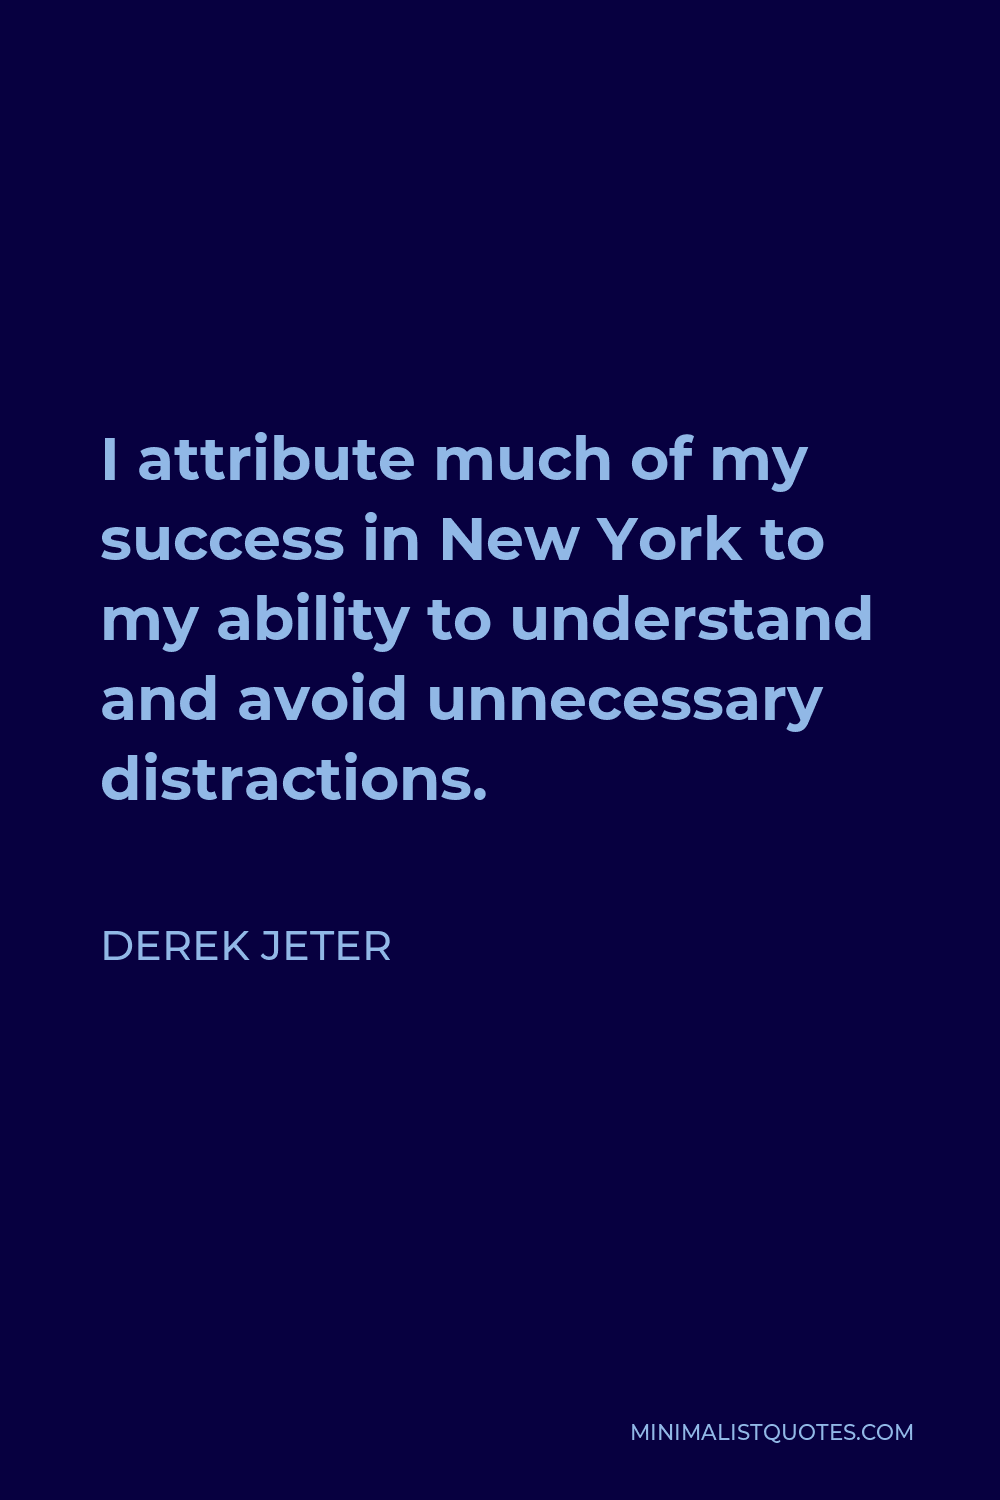 Derek Jeter Quote - I attribute much of my success in New York to my ability to understand and avoid unnecessary distractions.